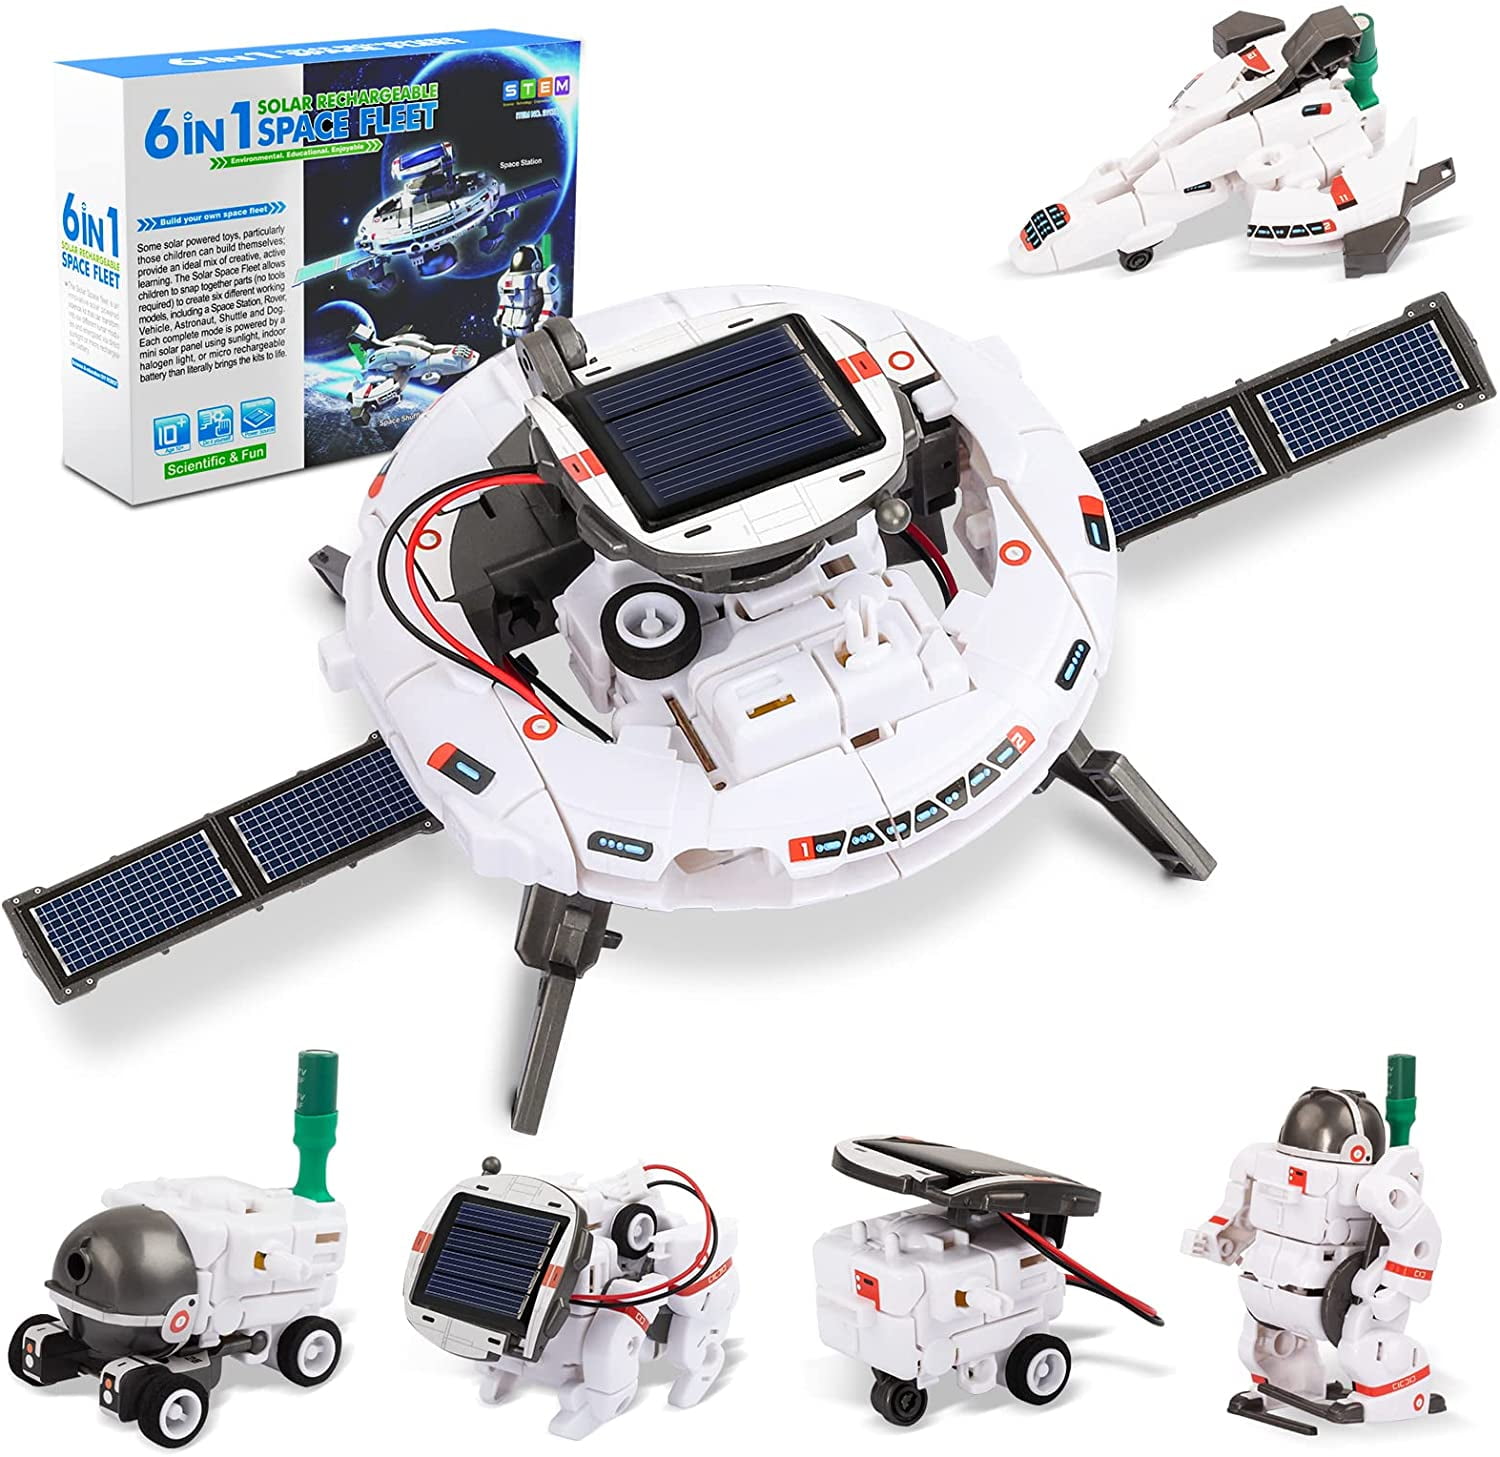 Space Shuttle 4 in 1 Space Explorer Building Toy,Solar Robot Kit w/ Moon Rover 